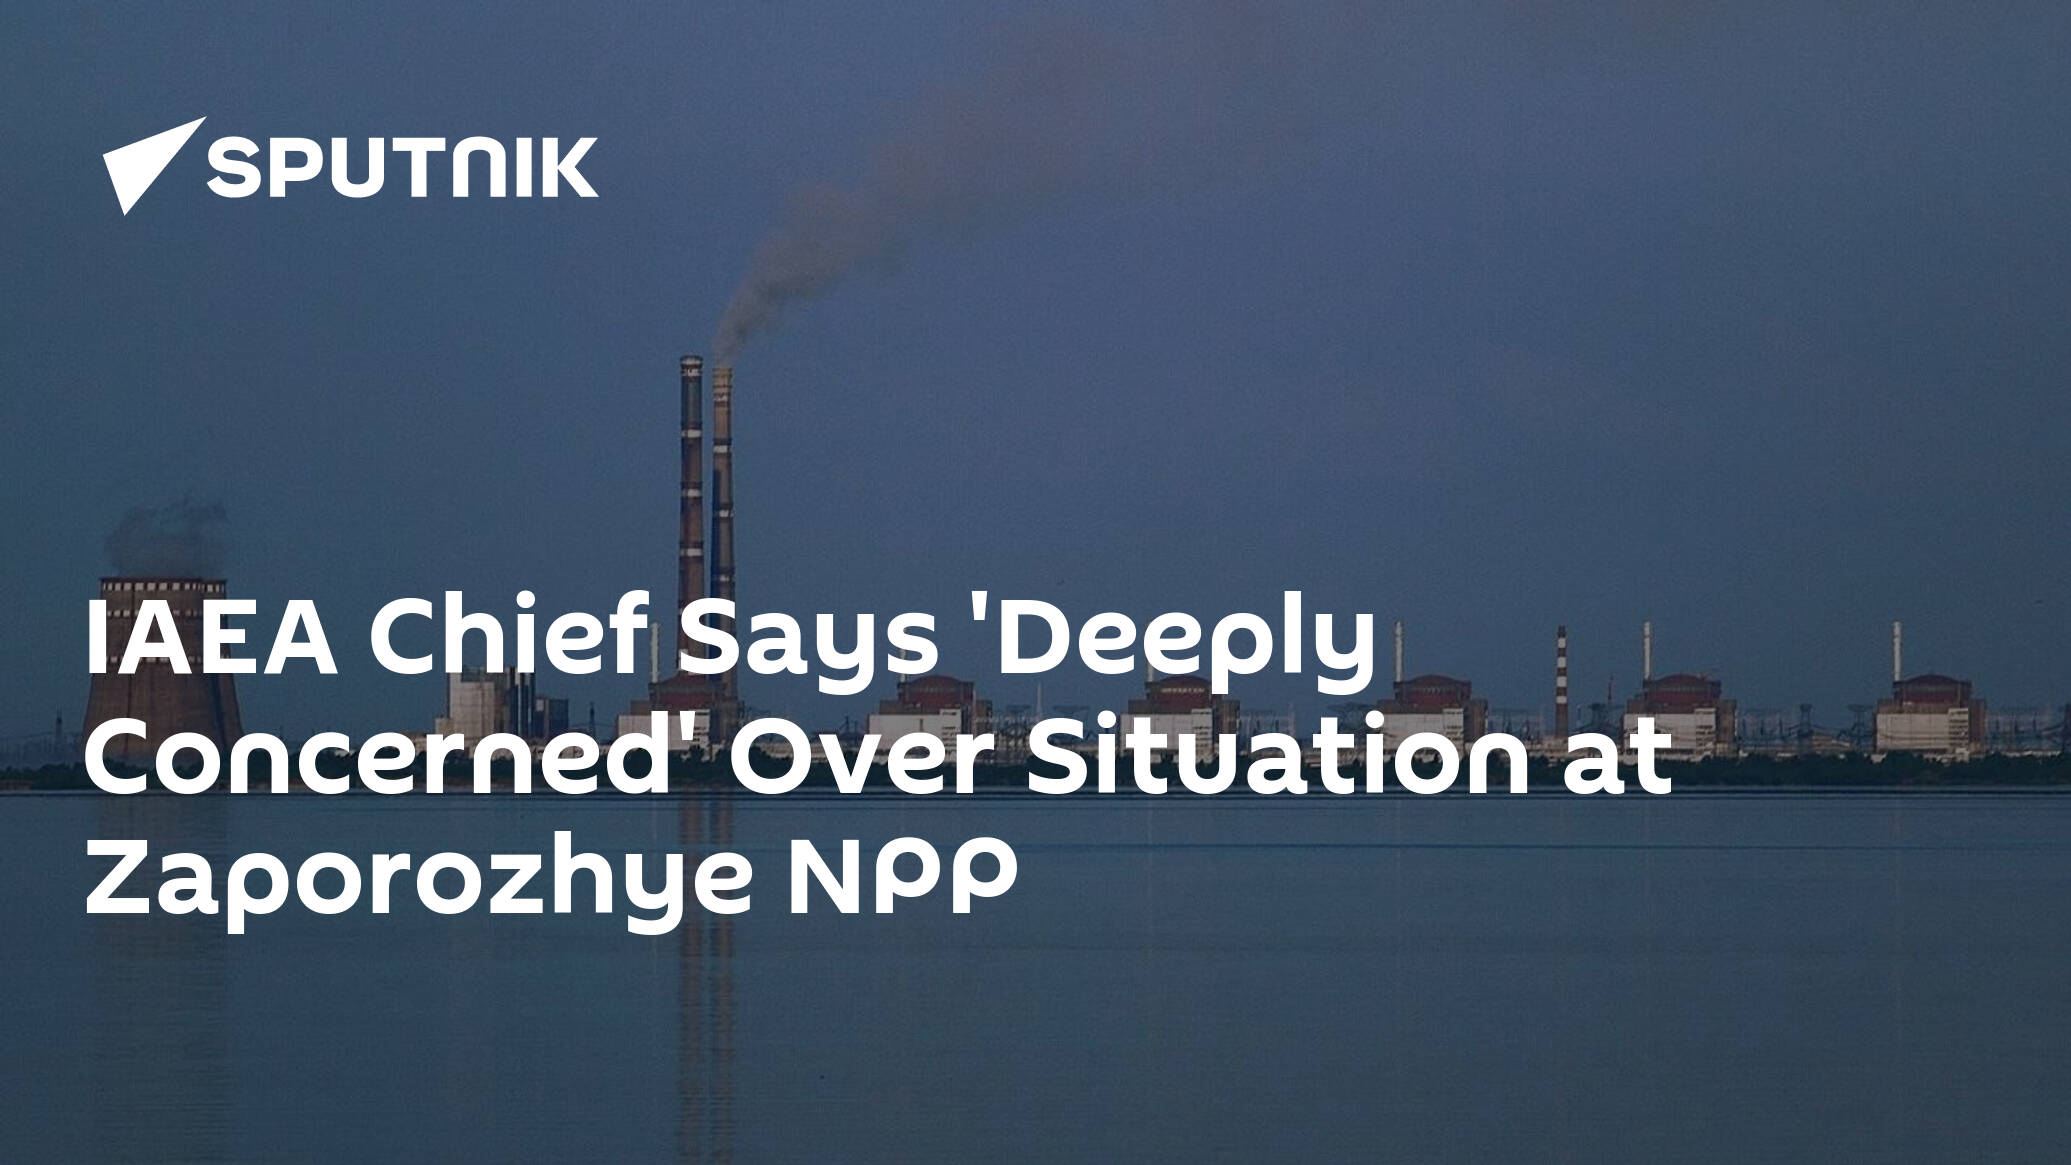 IAEA Chief Says 'Deeply Concerned' Over Situation at Zaporozhye NPP